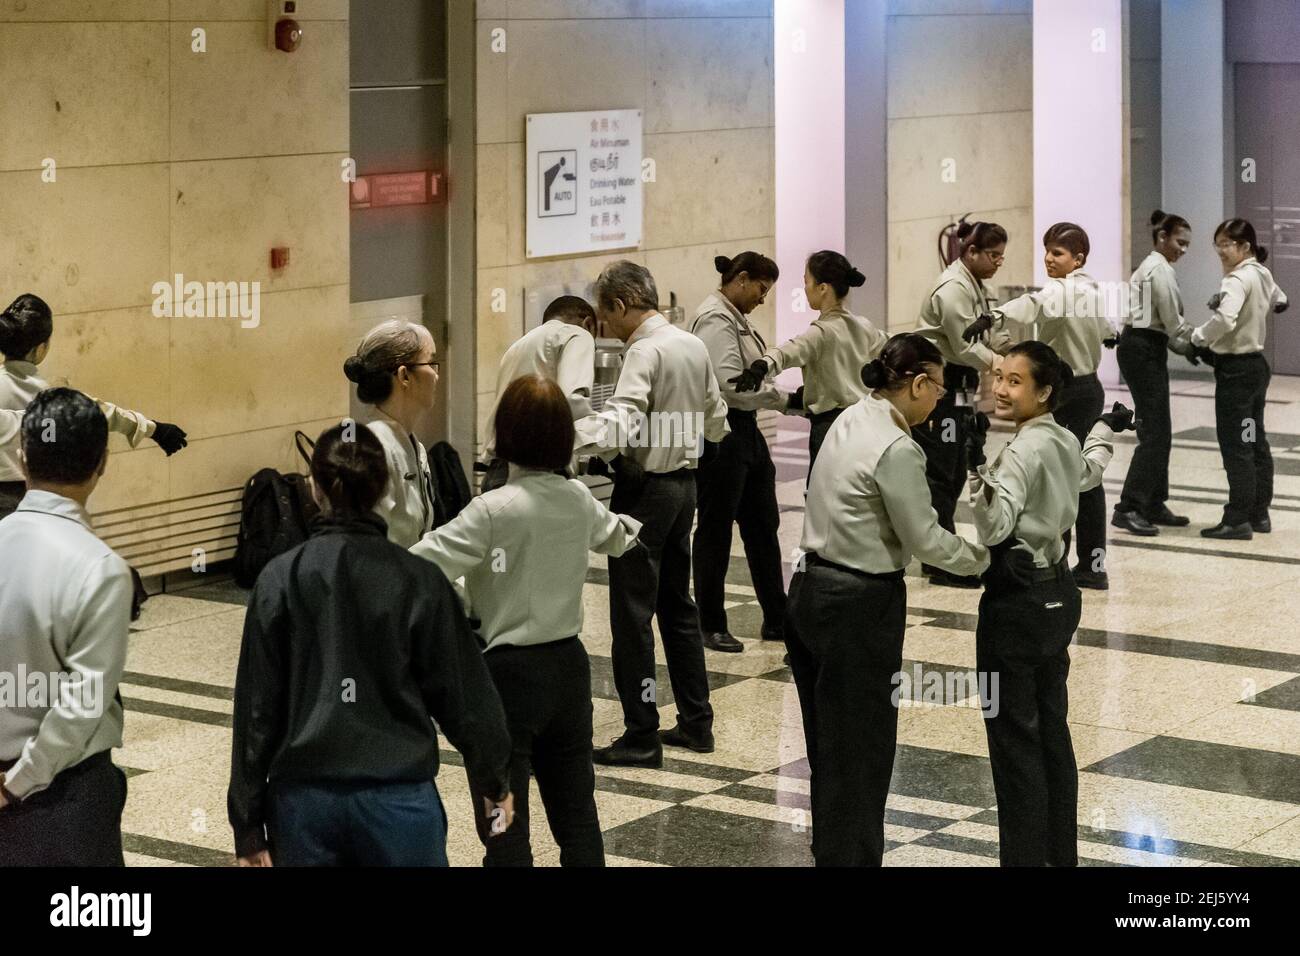 Airport security staff is rehearsing body search procedures Stock Photo